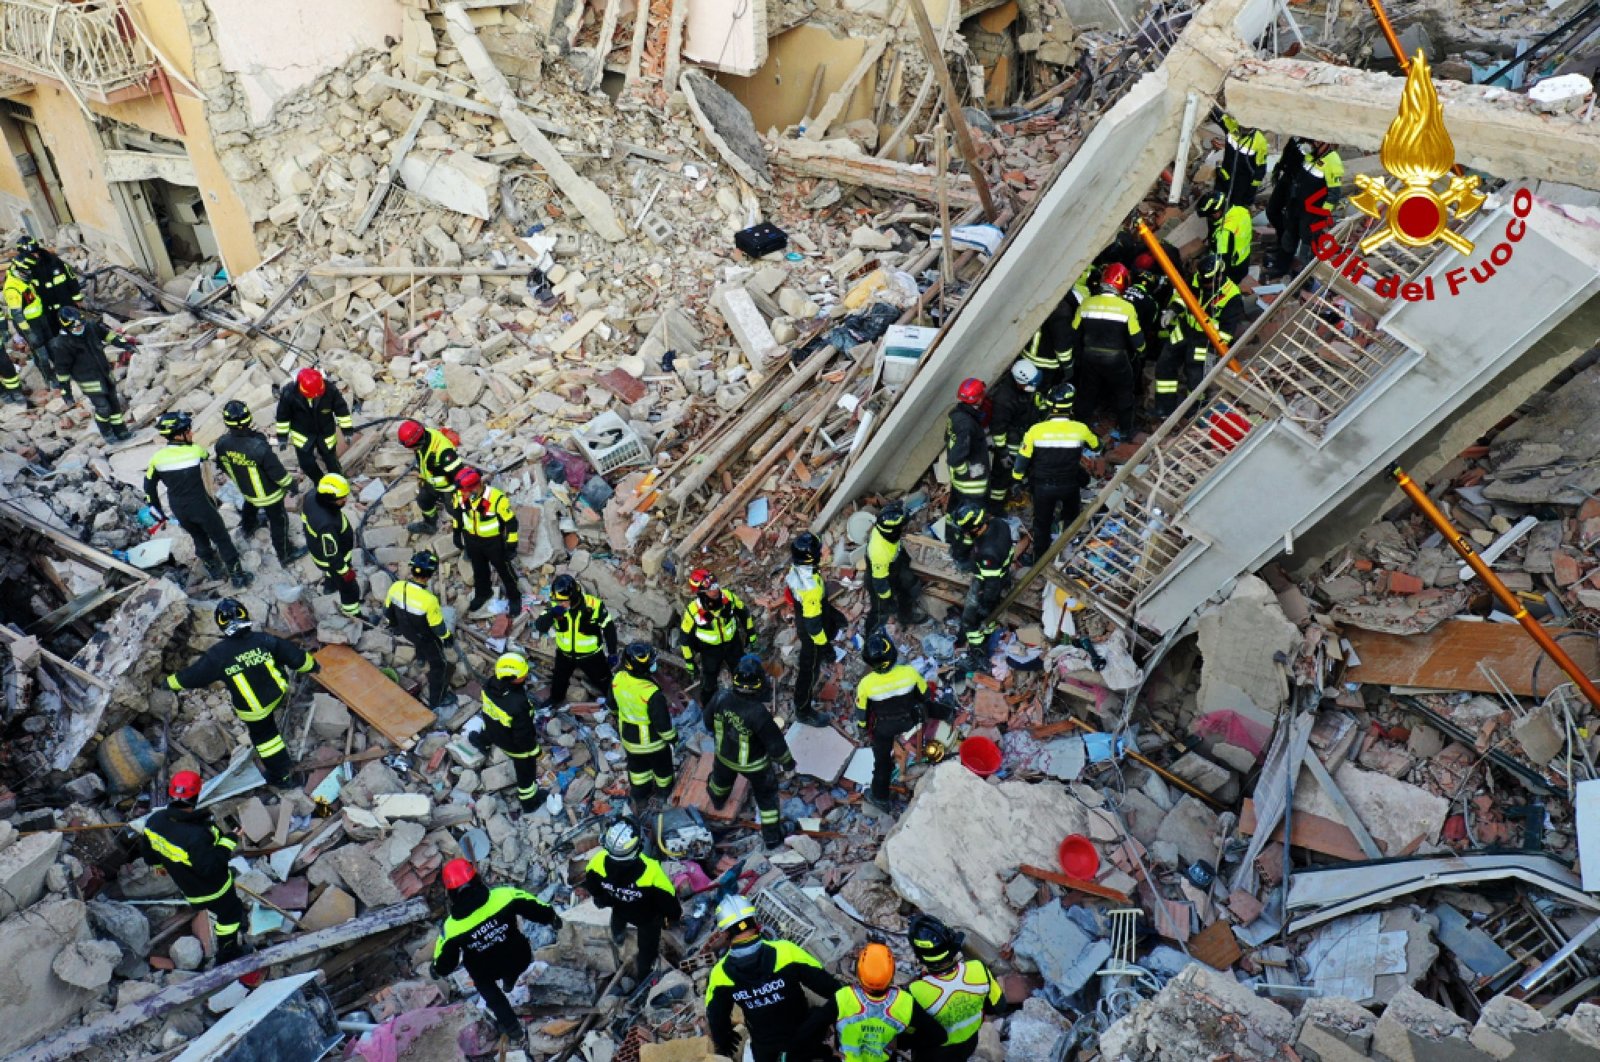 A picture released by Italian firefighters shows a collapsed four-story apartment building after a gas explosion in Ravanusa, Italy, Dec. 12, 2021. (AFP Photo)